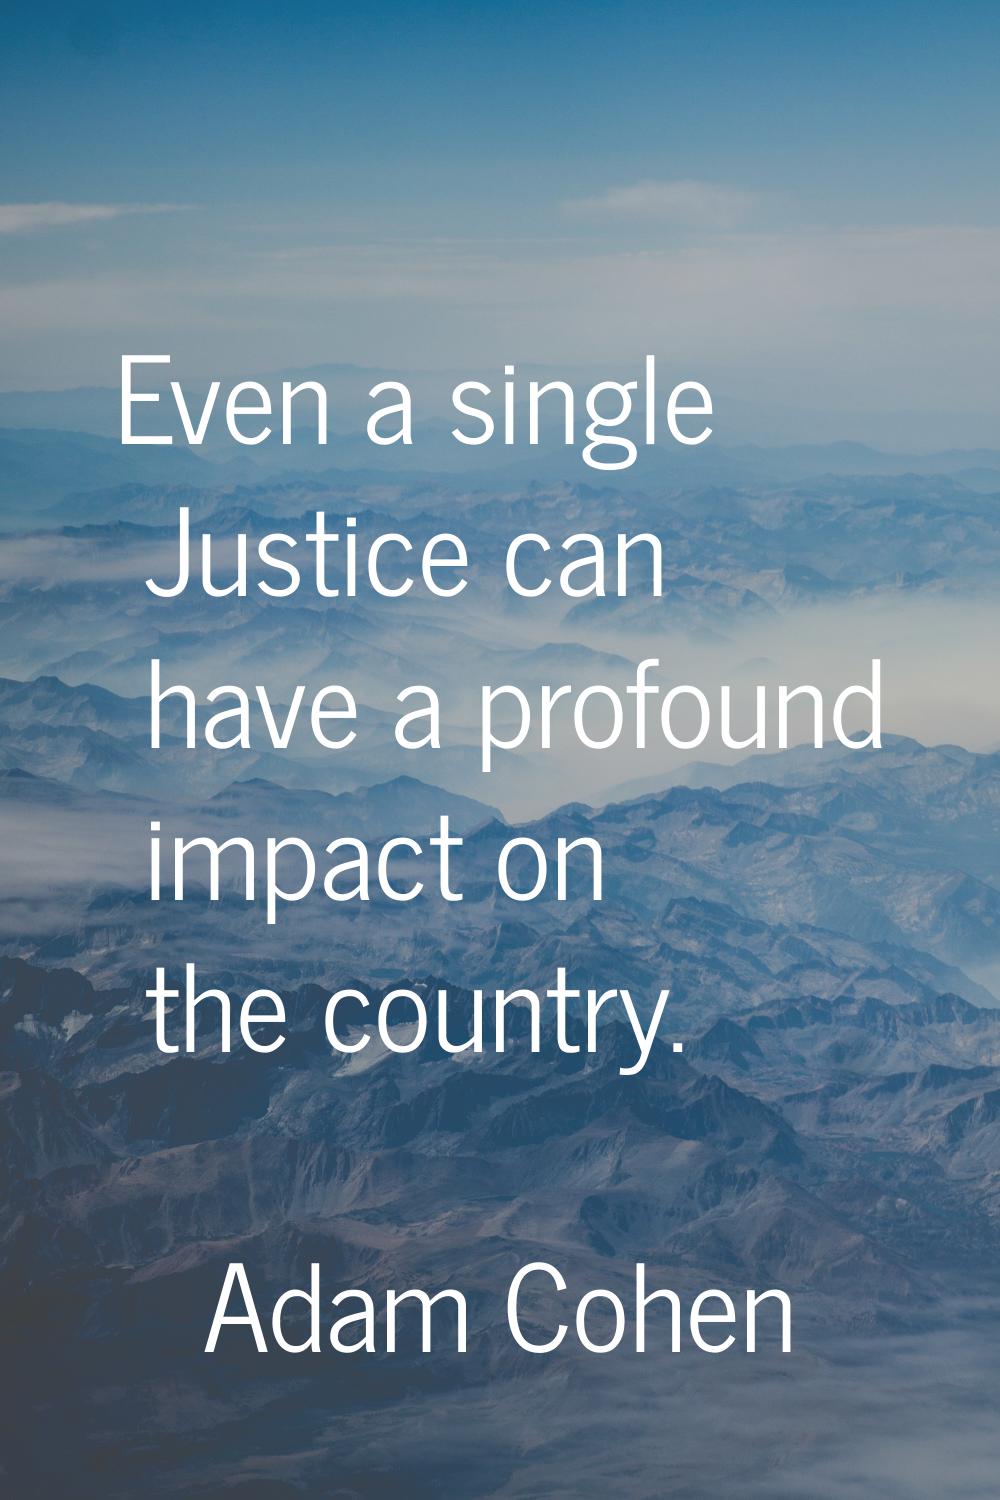 Even a single Justice can have a profound impact on the country.